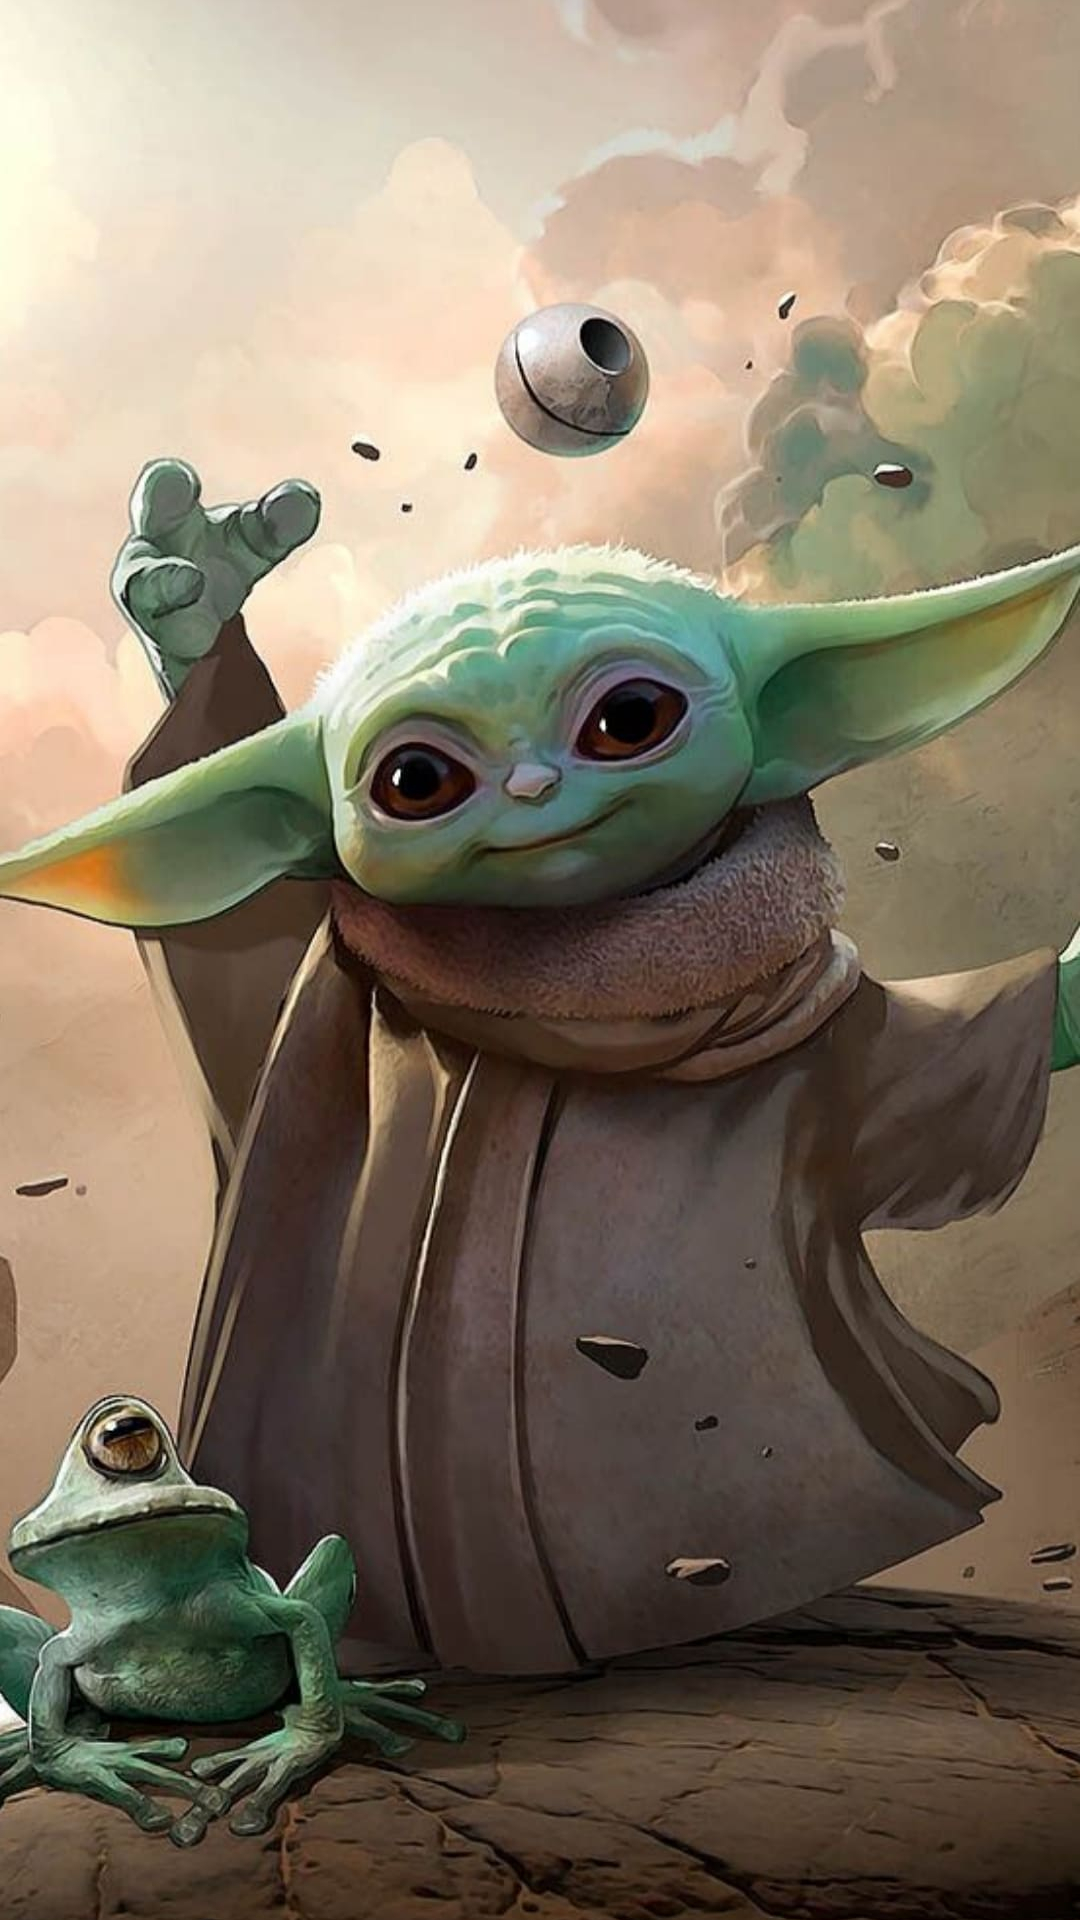 Free download Baby Yoda Wallpaper Getty Wallpaper [1080x2340] for your Desktop, Mobile & Tablet. Explore Baby Yoda Wallpaper. Baby Yoda Valentine Wallpaper, Yoda Wallpaper, Yoda Wallpaper